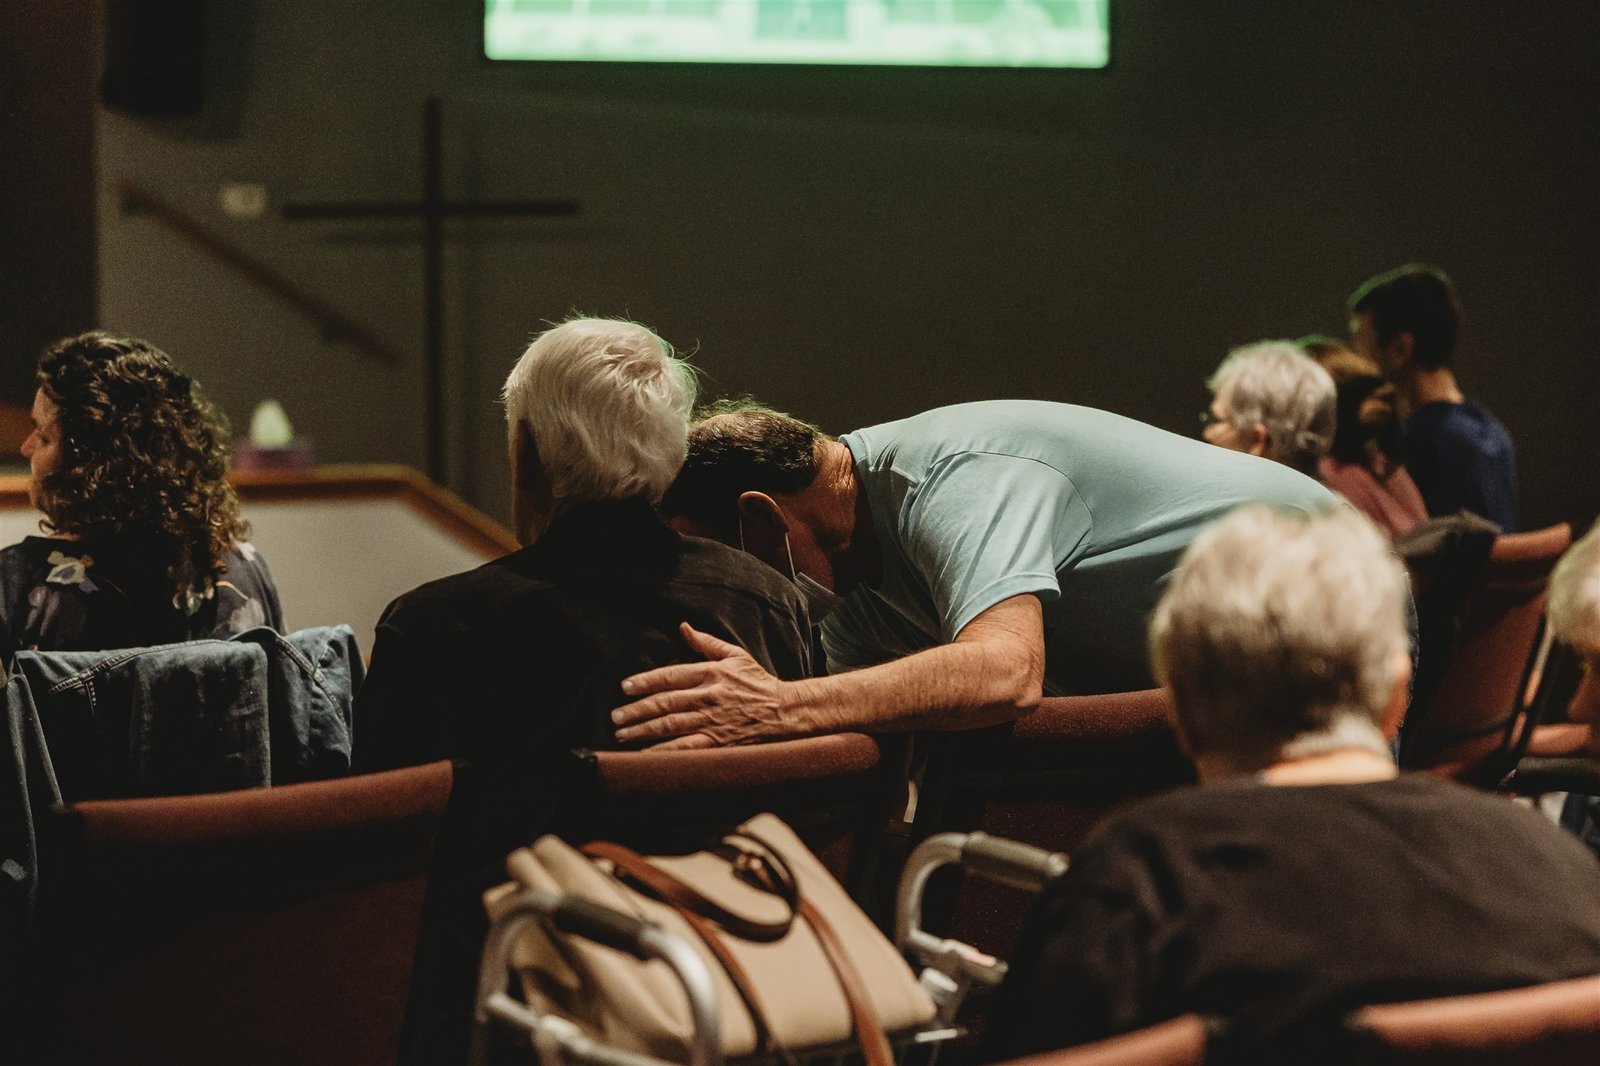 A photo of two people praying together